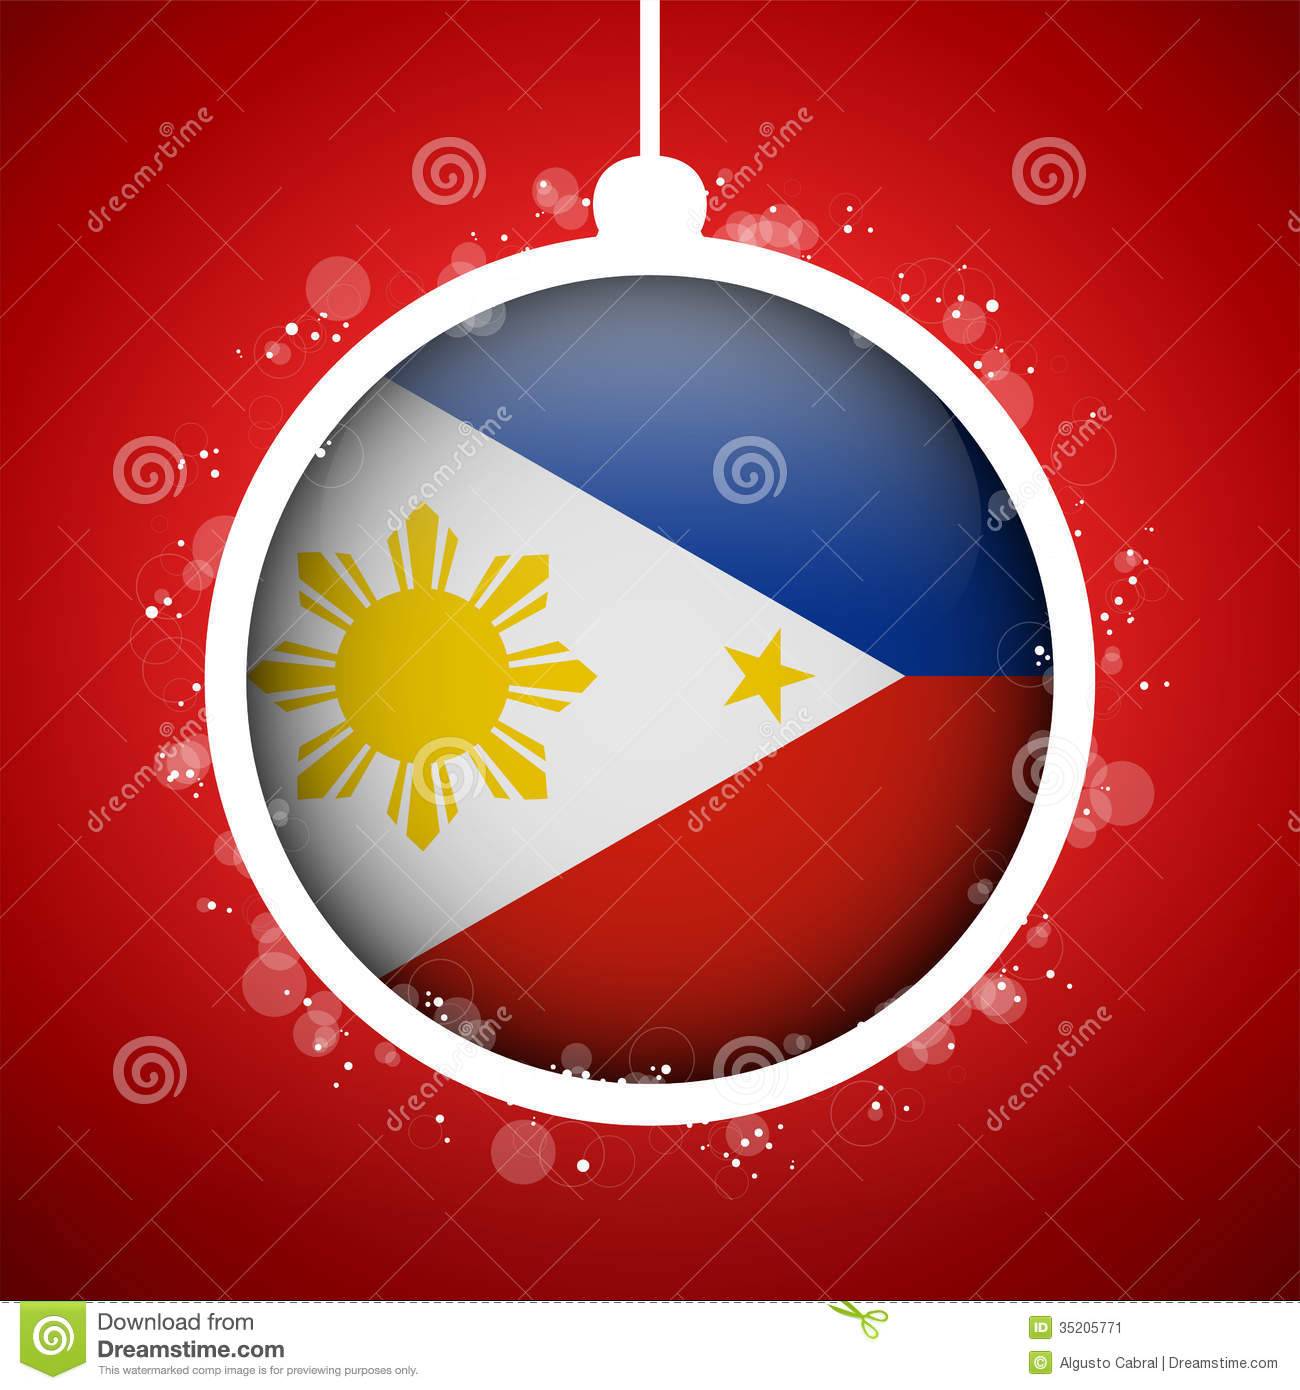 Merry Christmas Red Ball With Flag Philippines Stock Image   Image